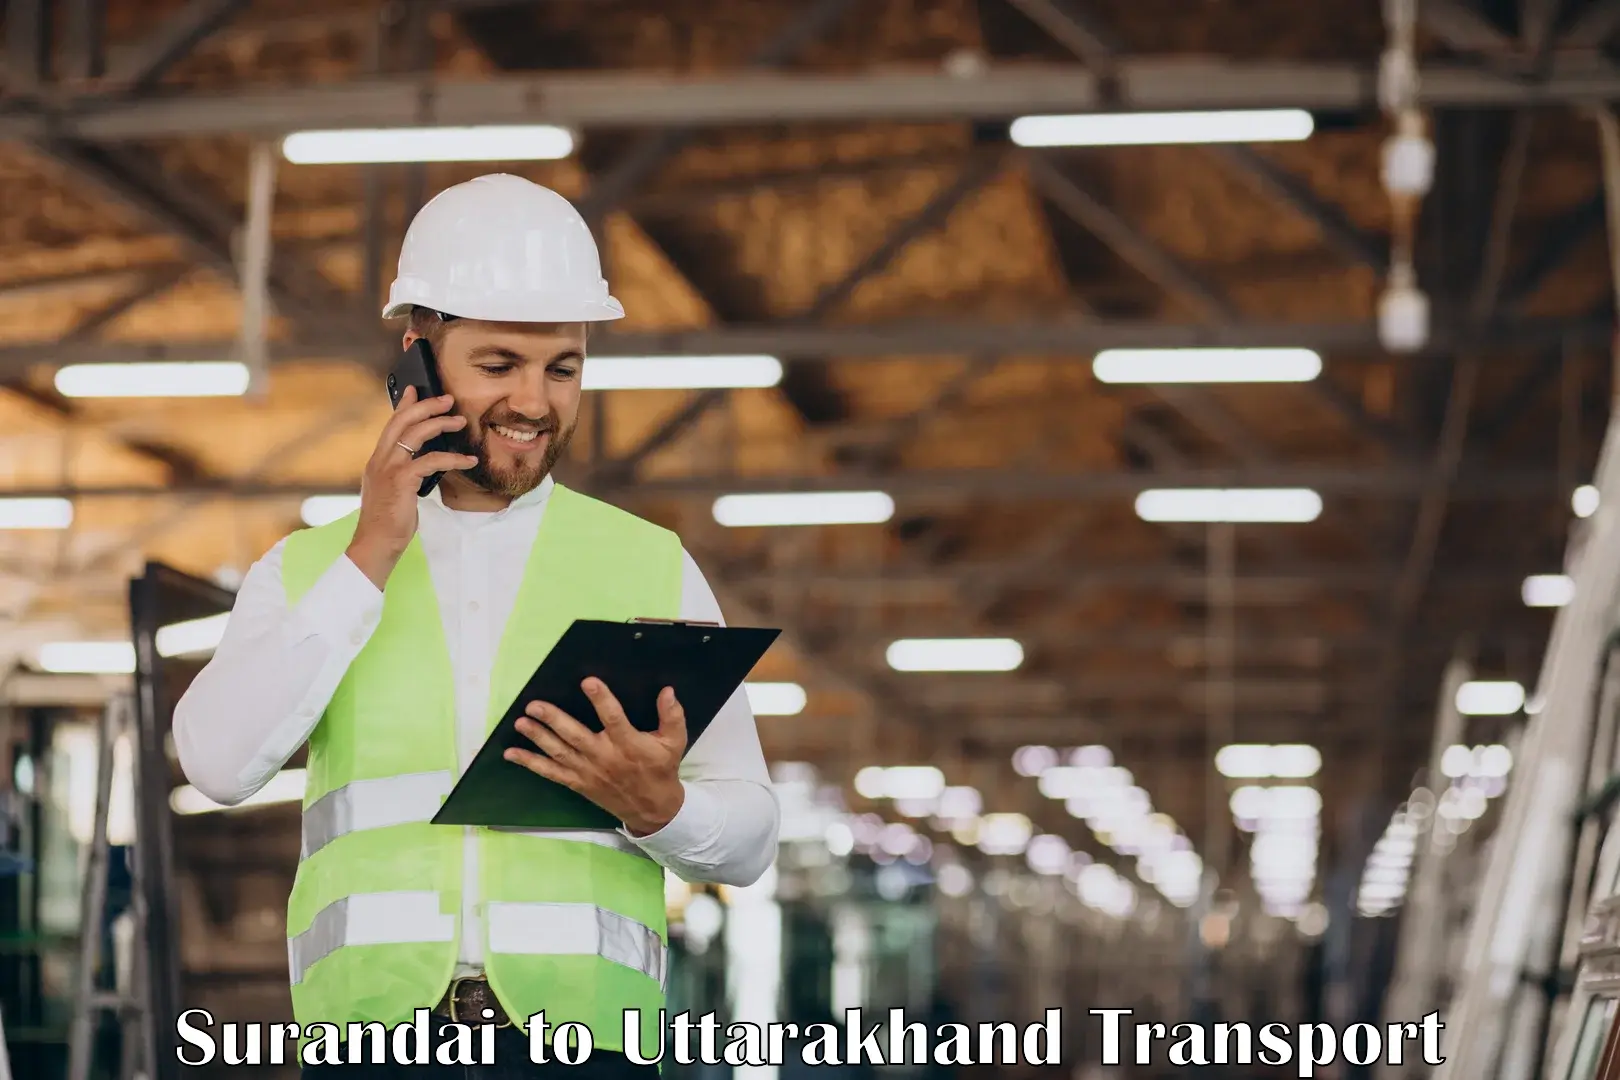 Best transport services in India Surandai to Lansdowne